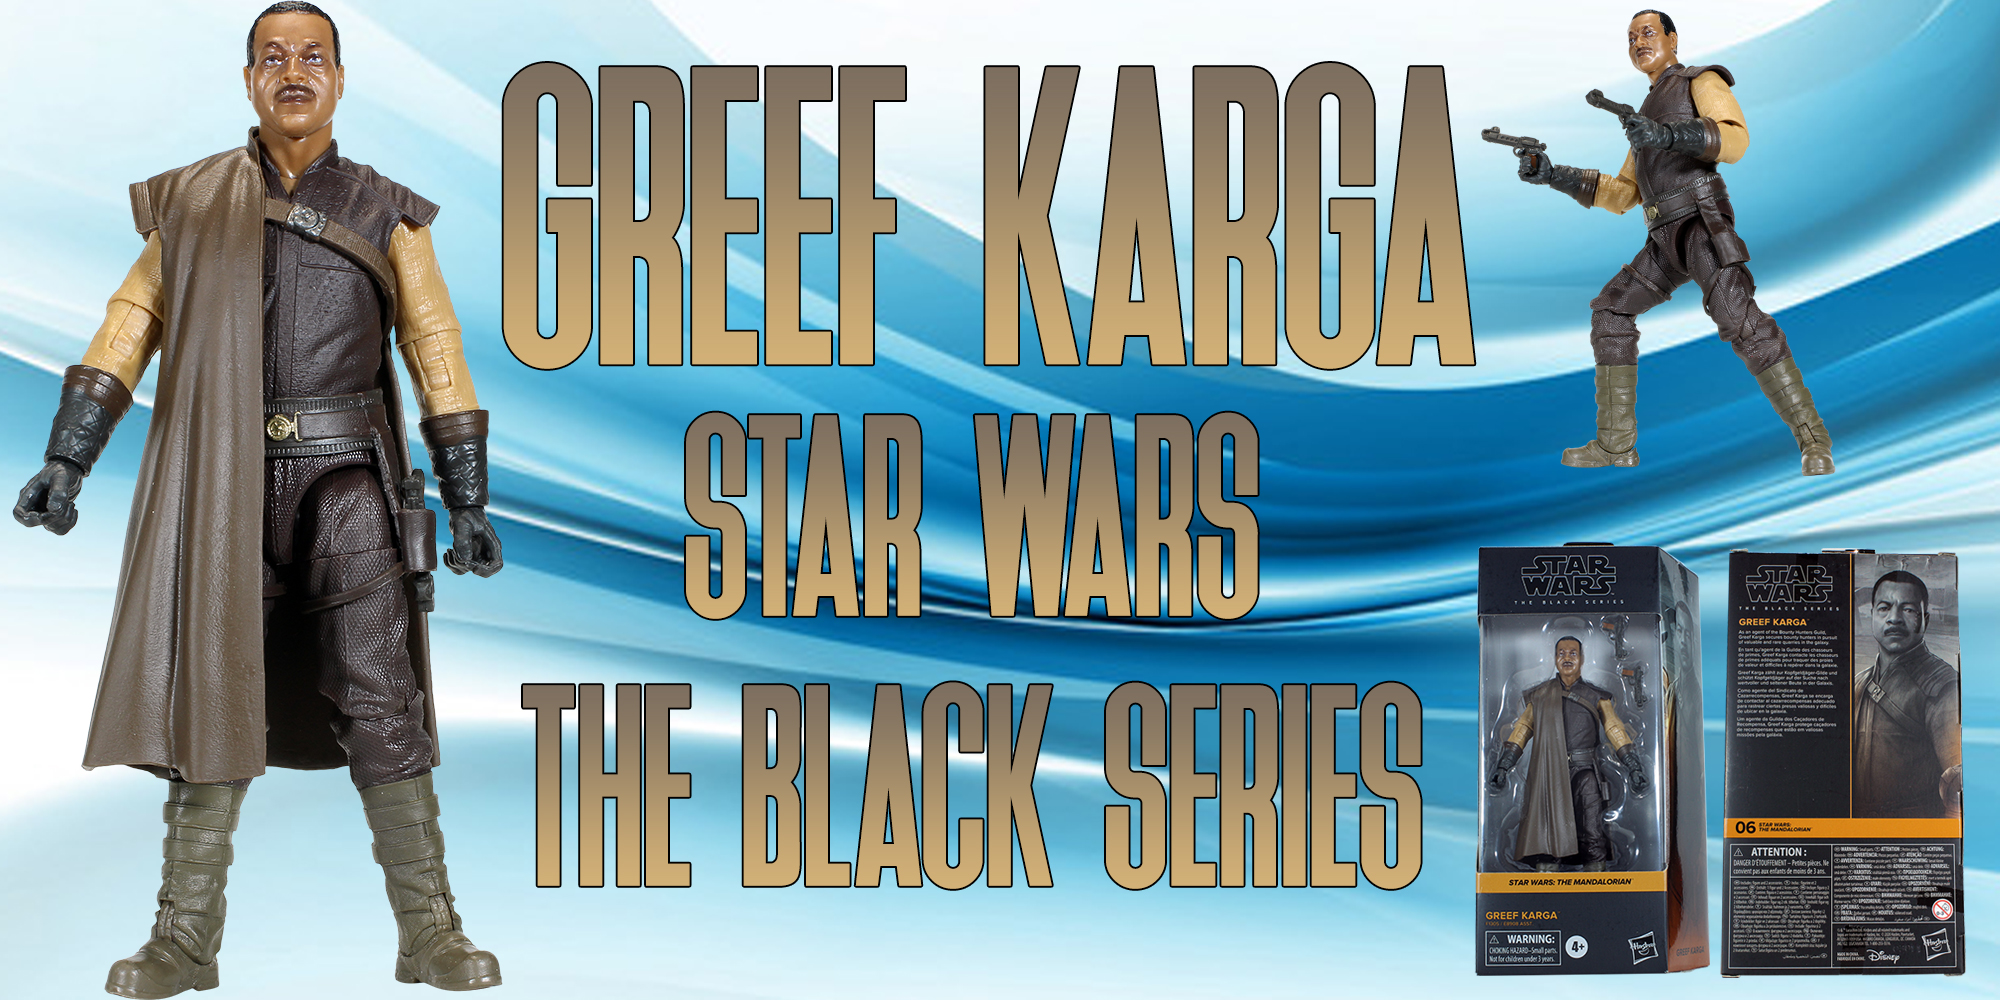 Black Series Greef Karag Added - Check It Out!